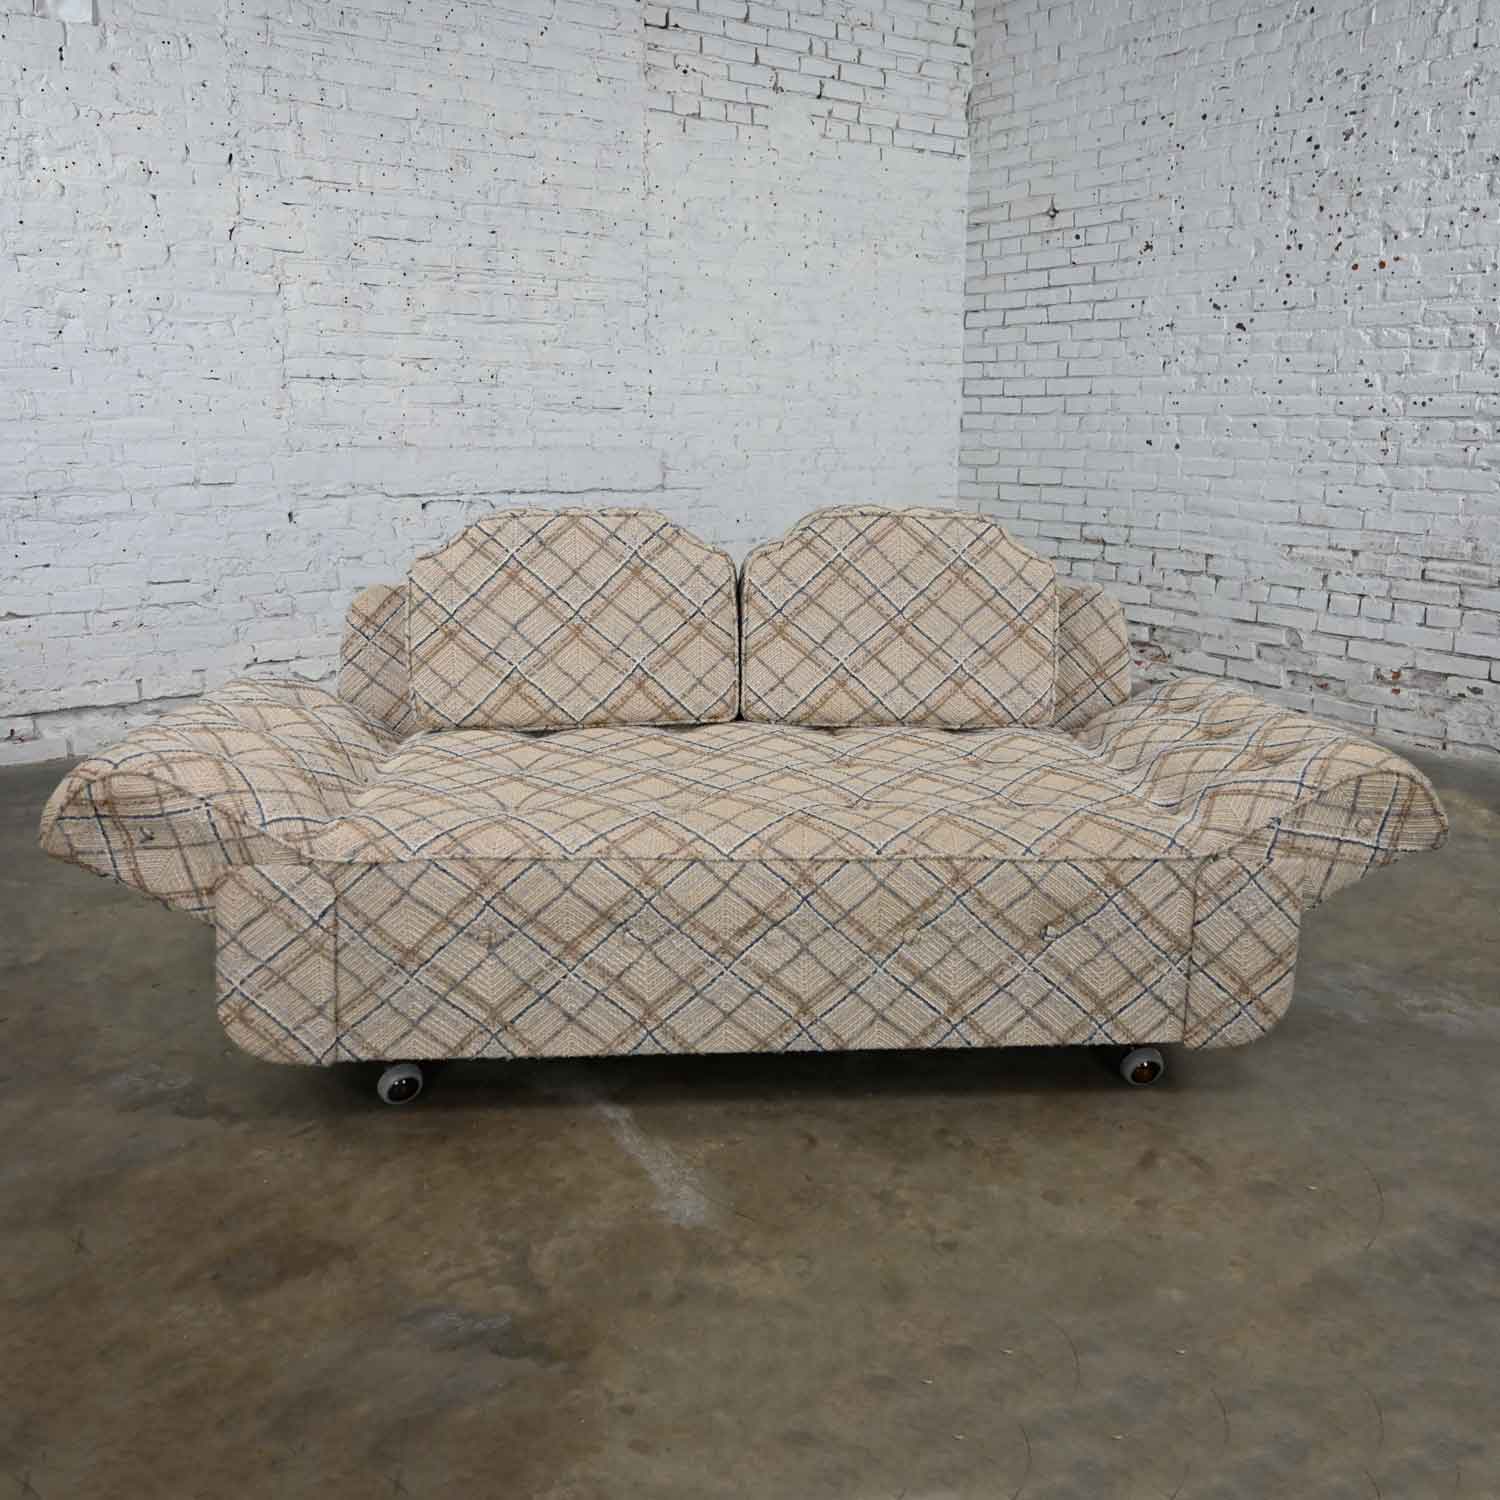 Modern to MCM Oatmeal Blue & Brown Plaid Pattern Convertible Love Seat Sofa Daybed or Chaise